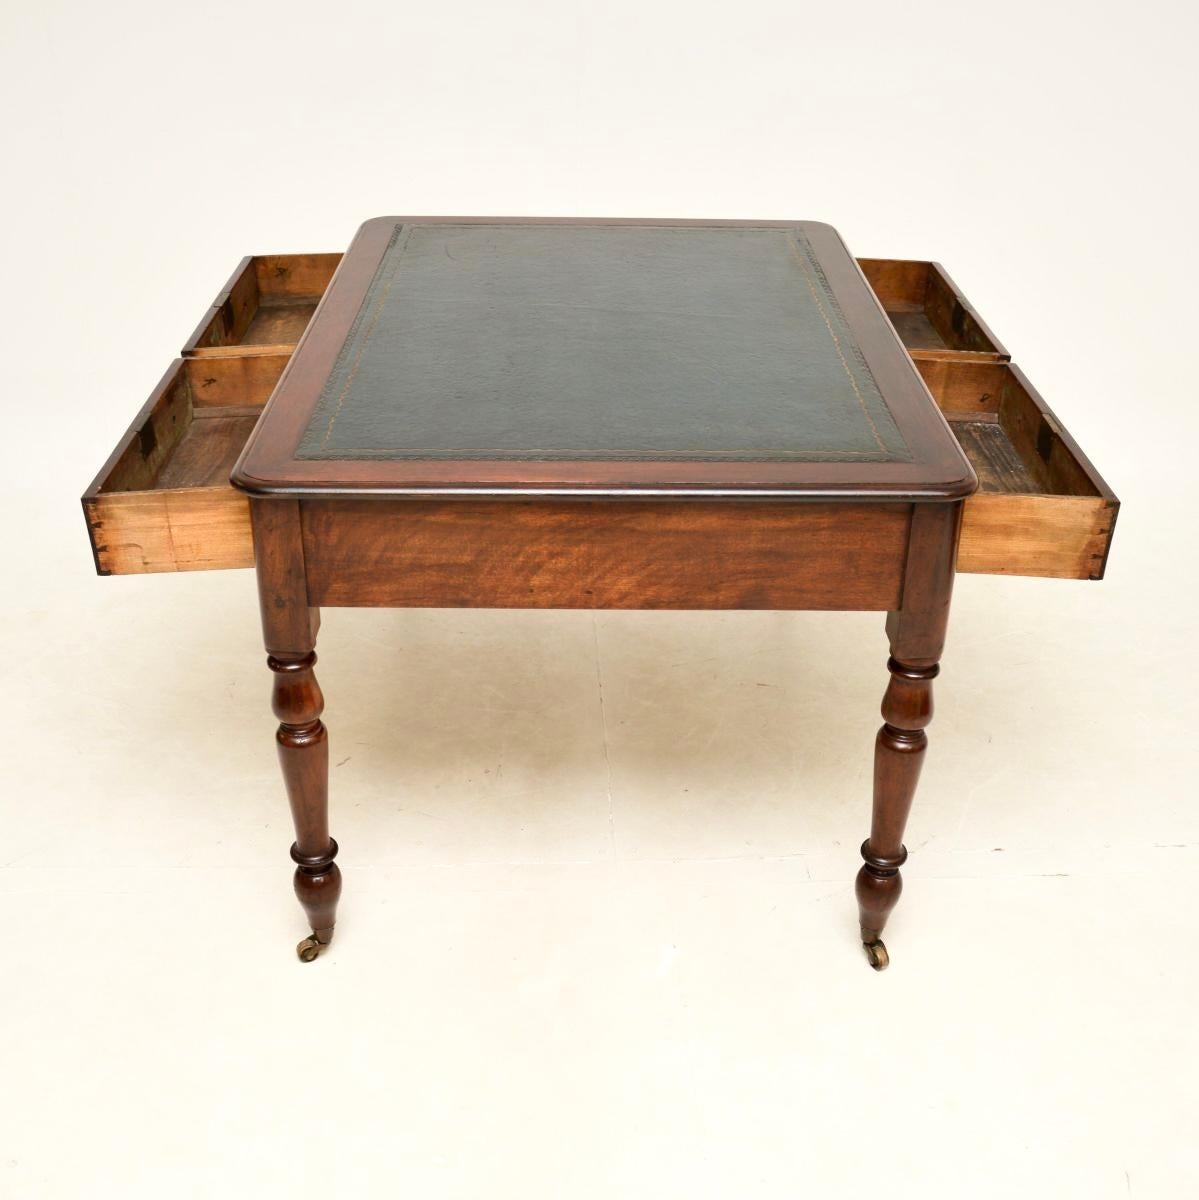 High Victorian Antique Victorian Leather Top Partners Desk / Writing Table For Sale